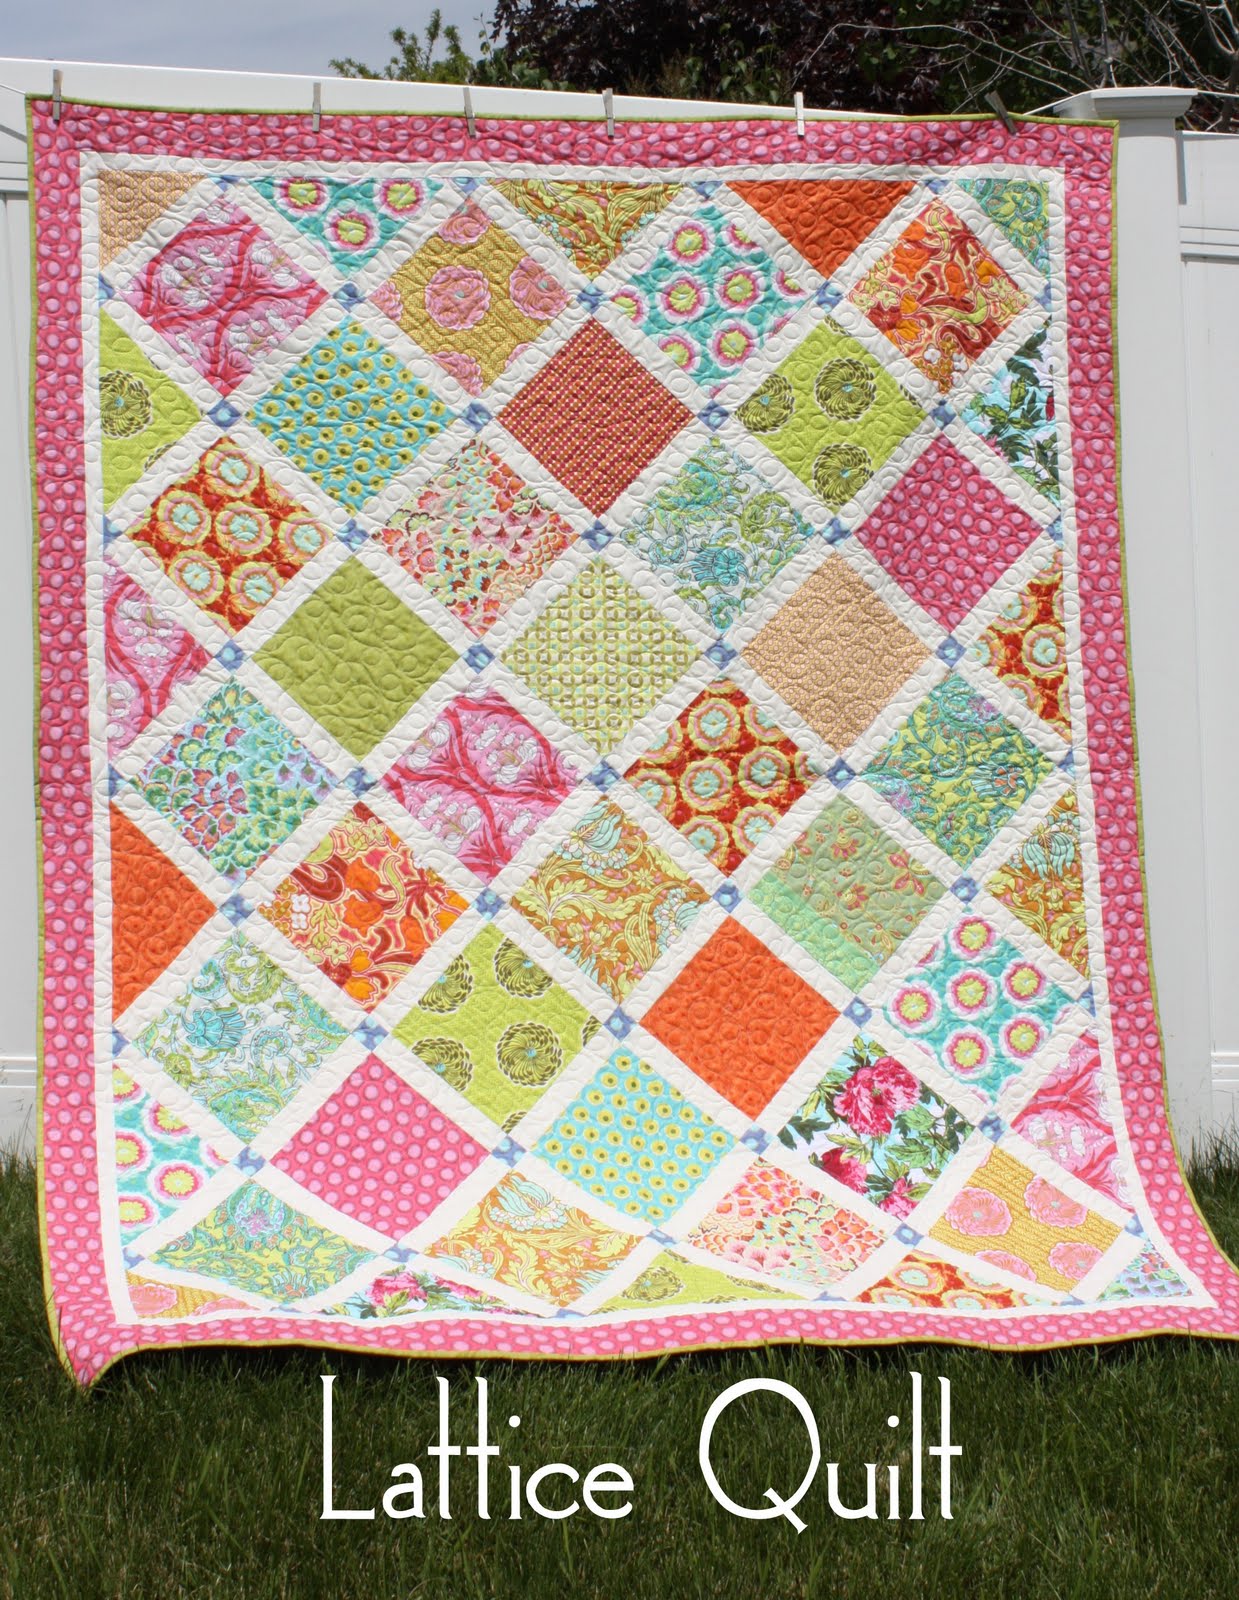 Free Patterns - Shabby Fabric
s | Moda Fabric, Online Quilting